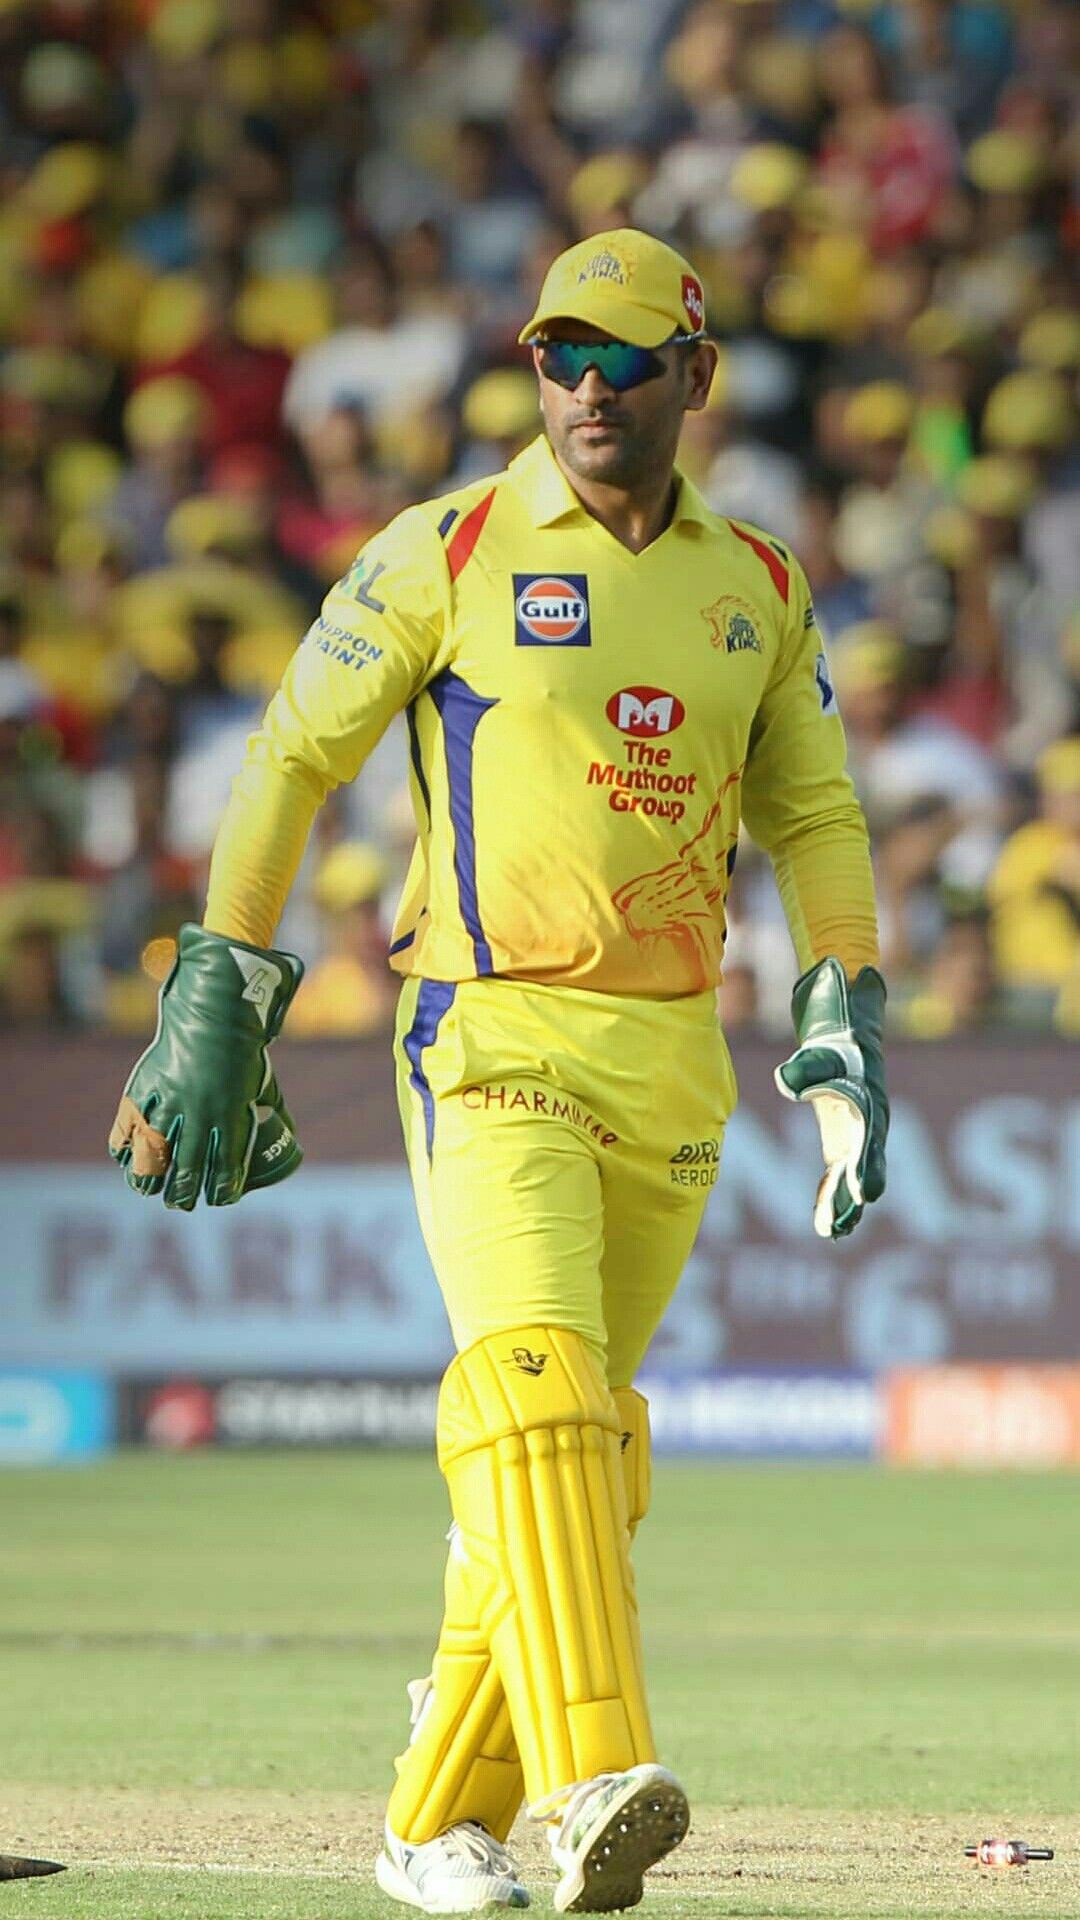 Cricket Wallpapers, Hd Wallpapers For Mobile, Hd Wallpaper - Ms Dhoni Csk Hd , HD Wallpaper & Backgrounds